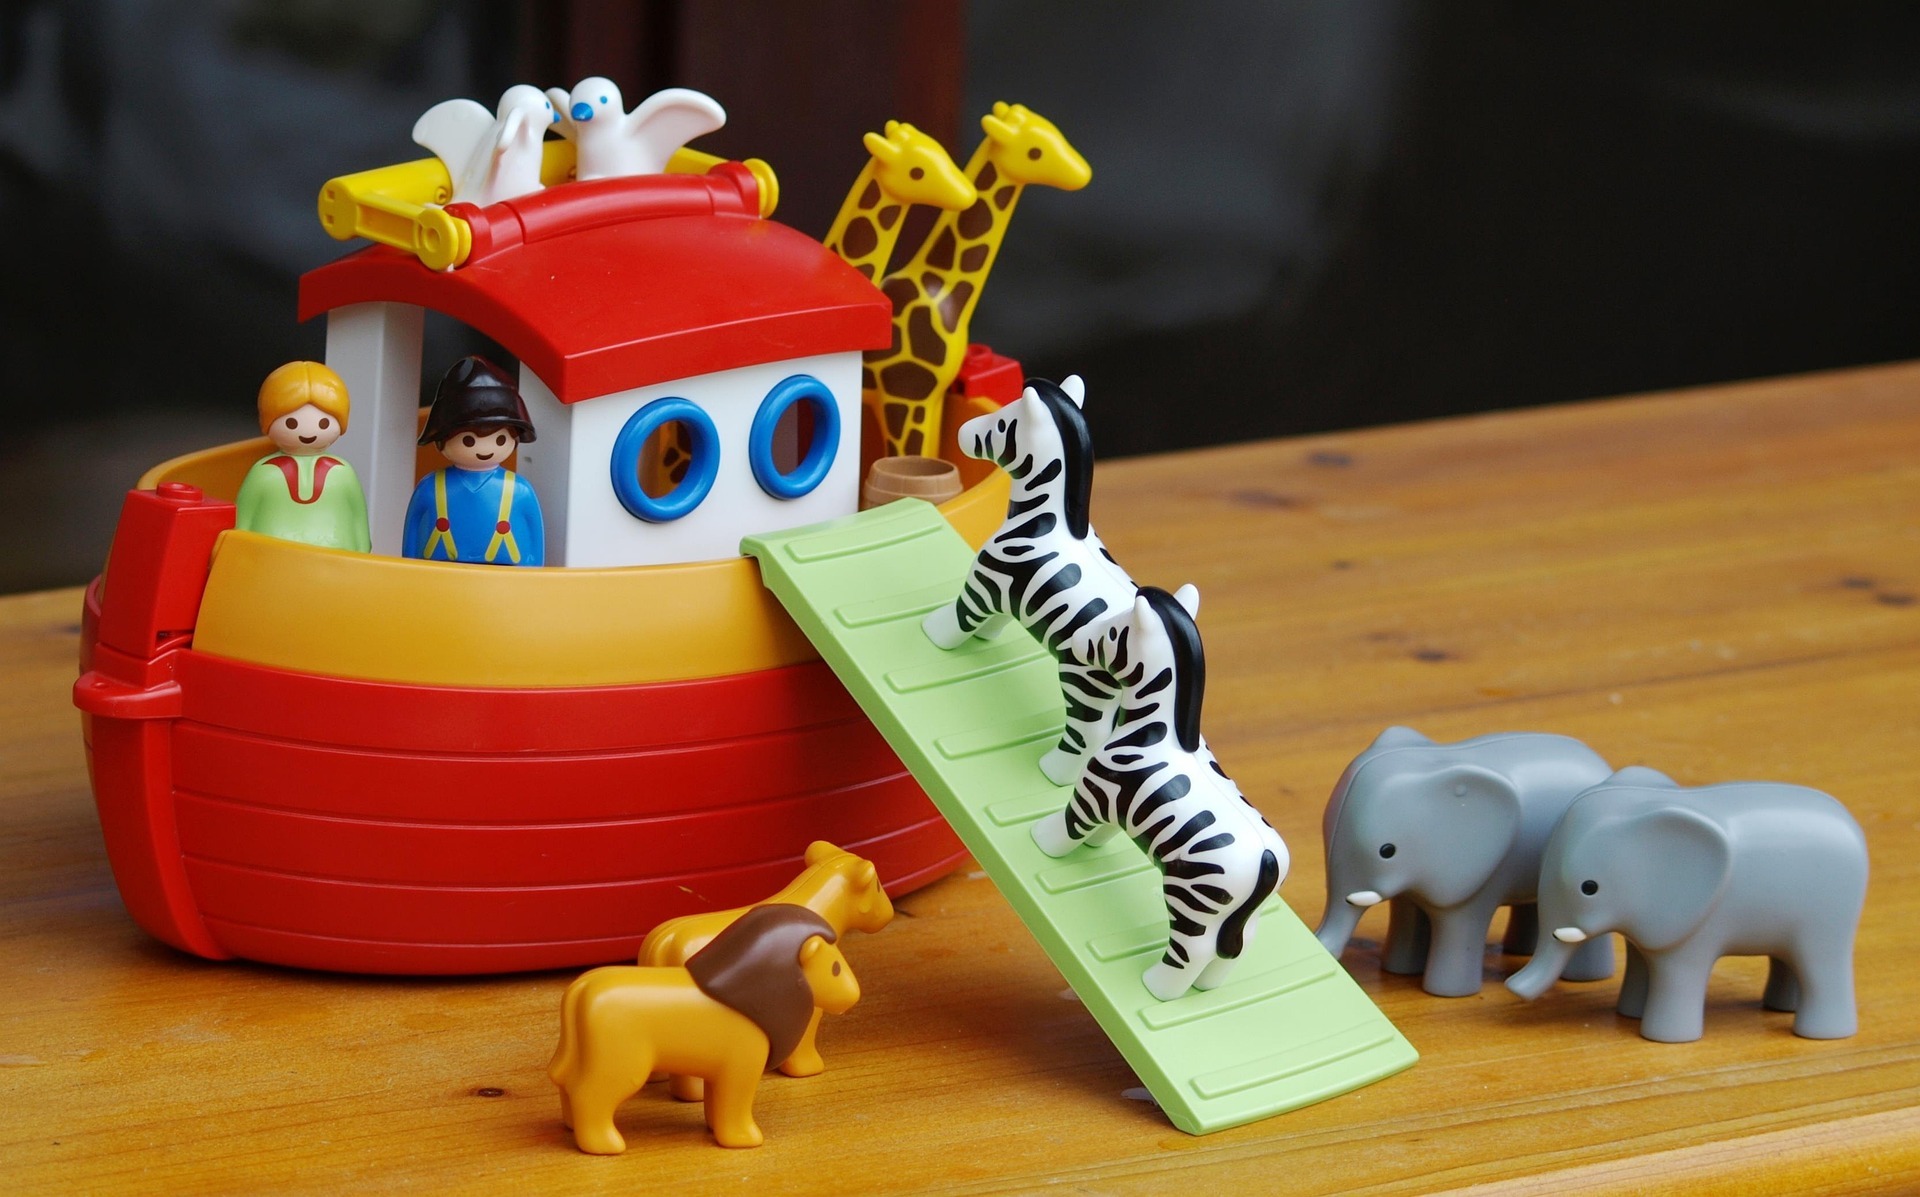 Toy Noah’s ark with toy animals